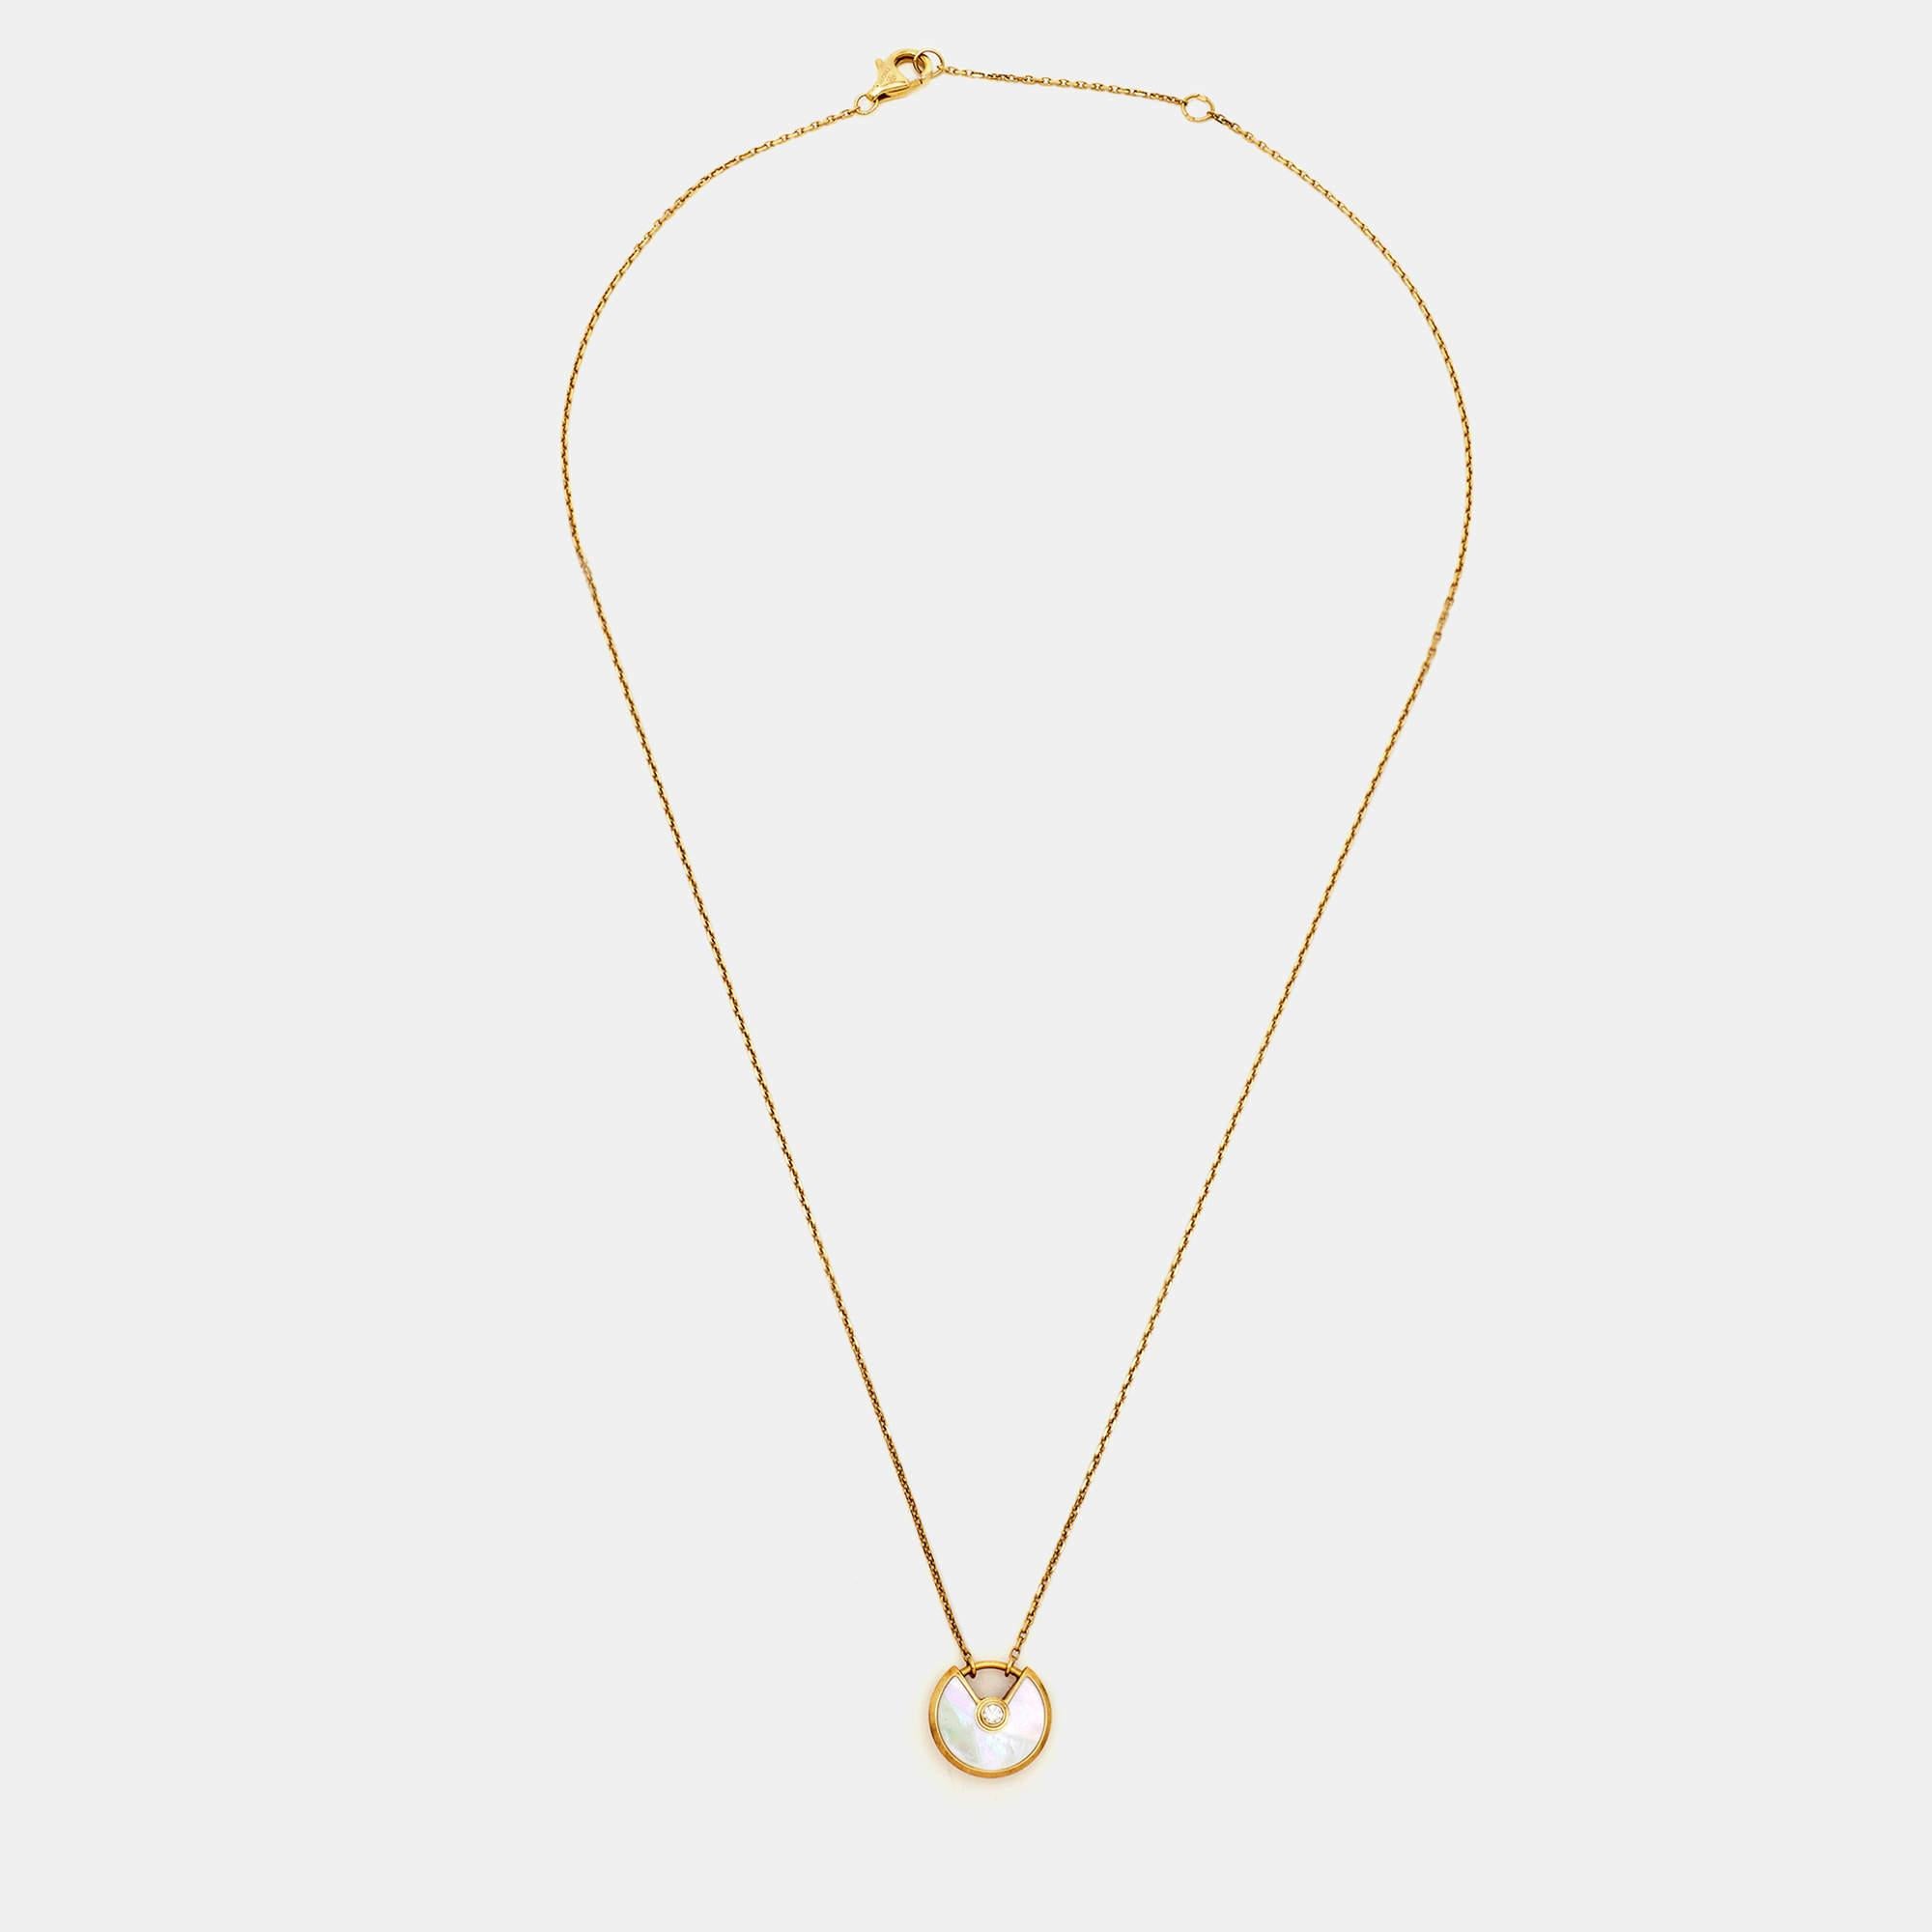 Elevate your elegance with this Cartier necklace. Exquisite craftsmanship meets timeless design in this stunning piece, an embodiment of luxury and sophistication that complements every neckline.

